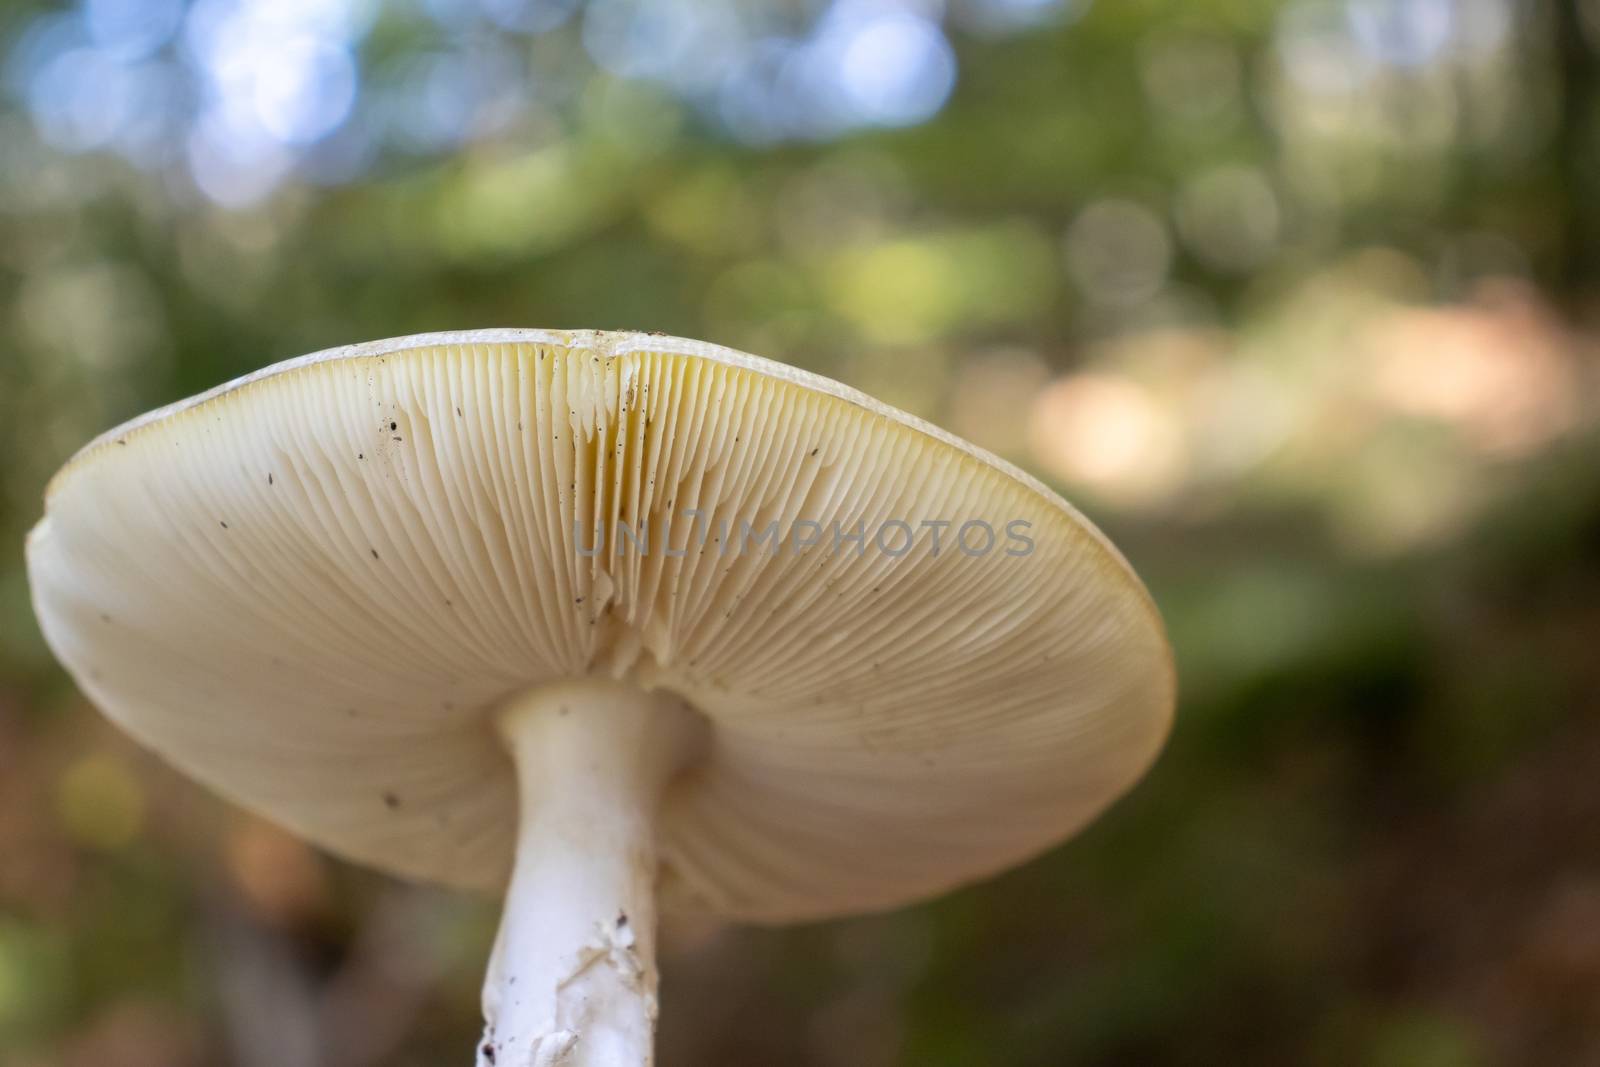 background under the hat of the mushroom with reeds in the woods.